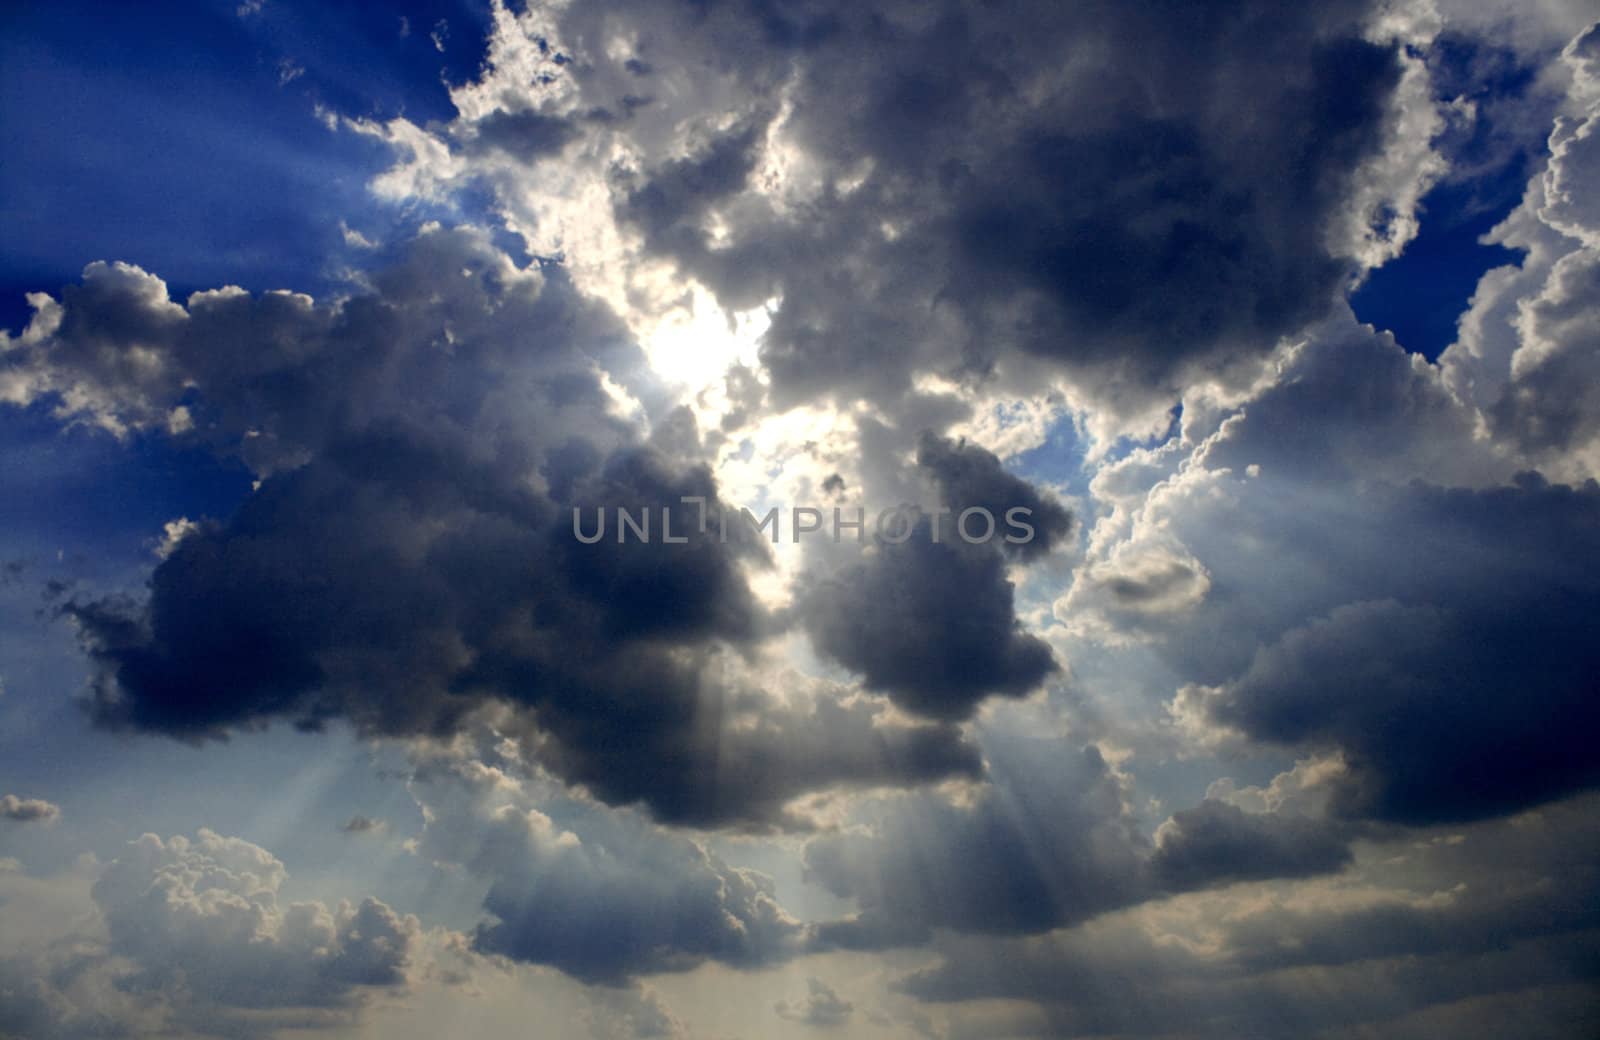 View of white and gray storm clouds in blue sky with rays of light